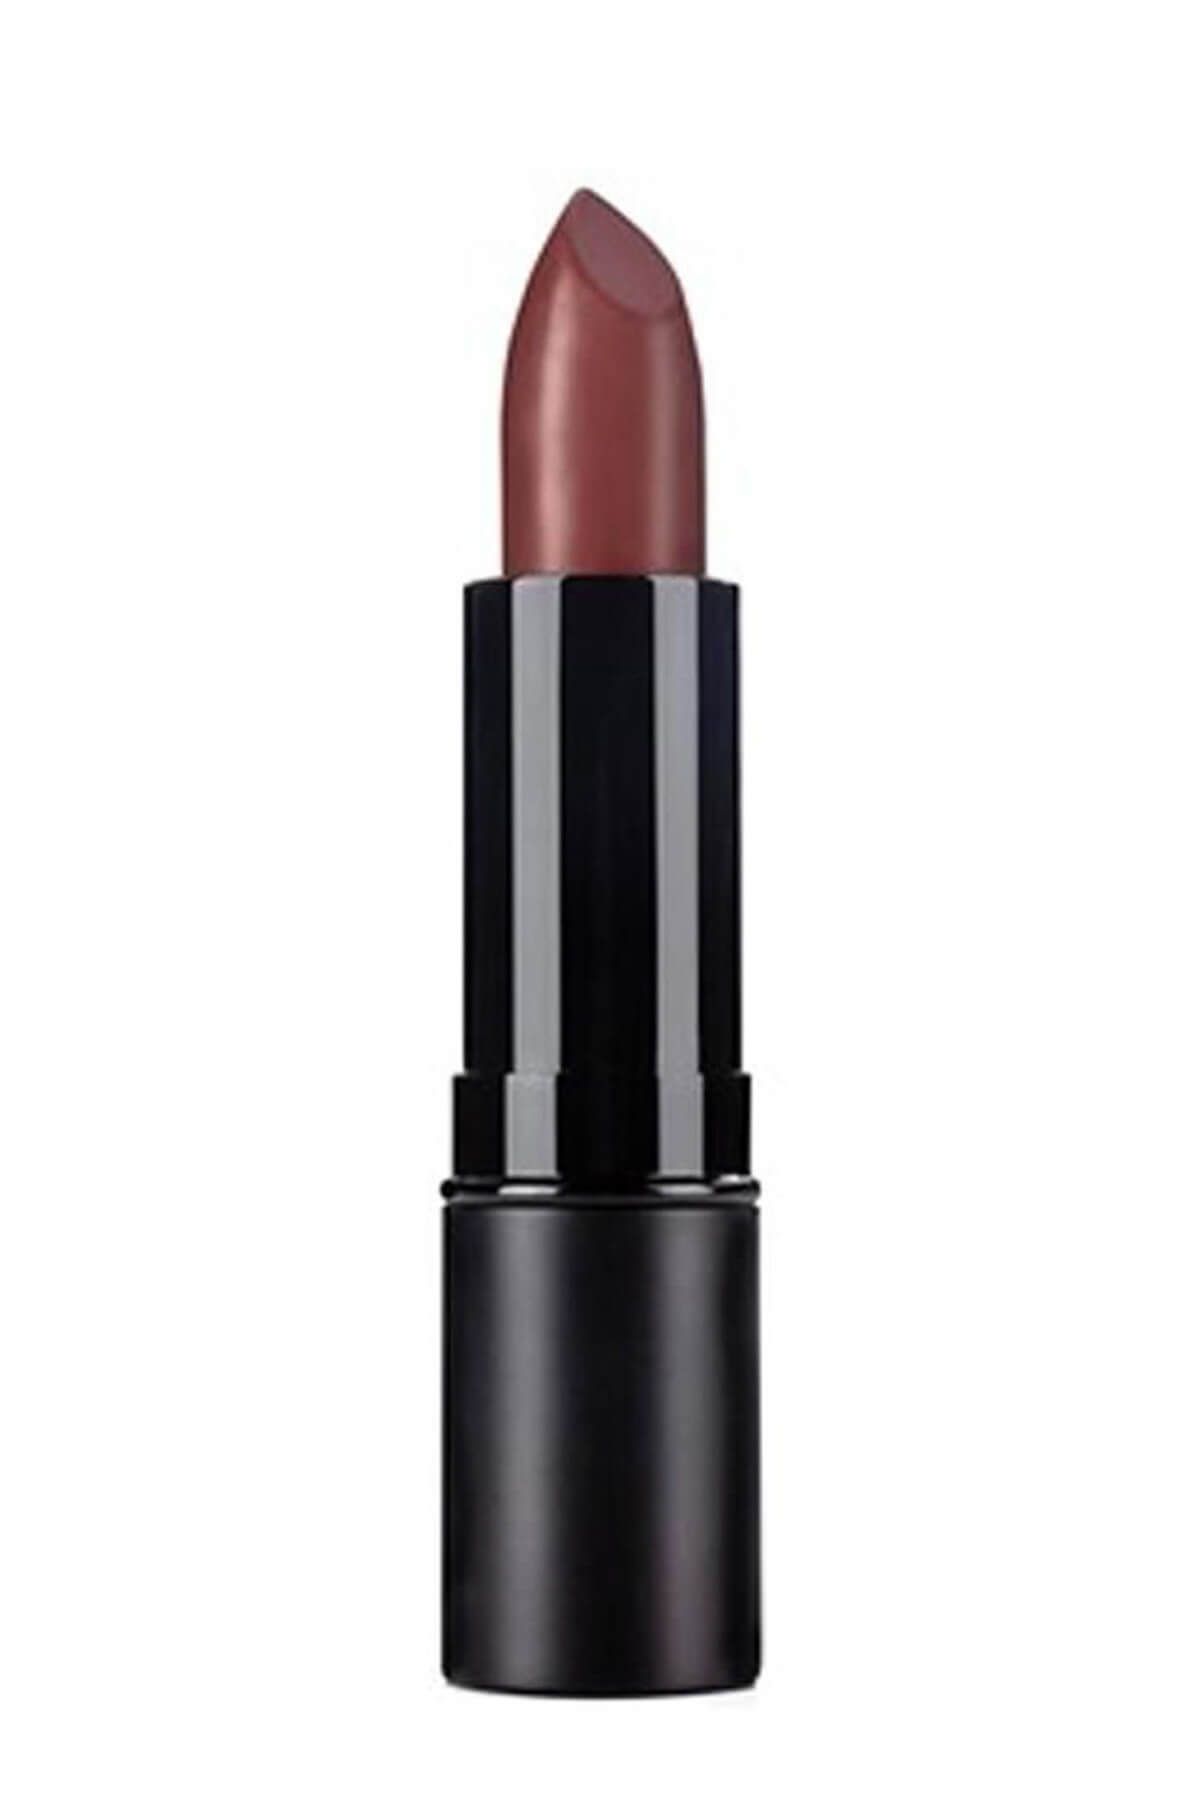 Youngblood Ruj - Lipstick Sheer Passion 696137141084